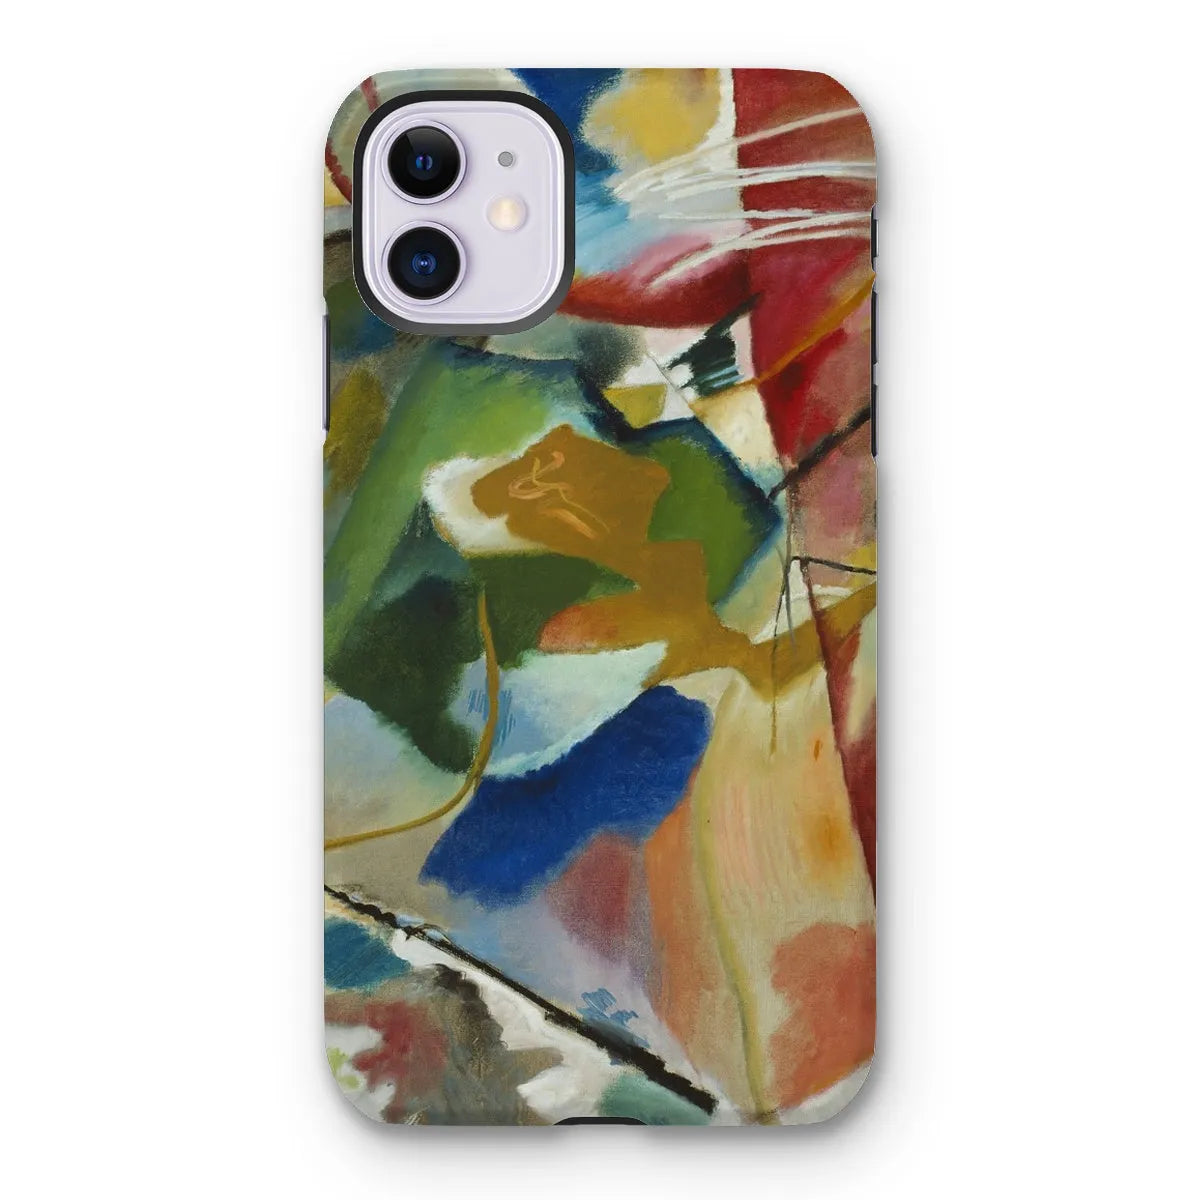 Painting With Green Center Art Phone Case - Wassily Kandinsky - Iphone 11 / Matte - Mobile Phone Cases - Aesthetic Art